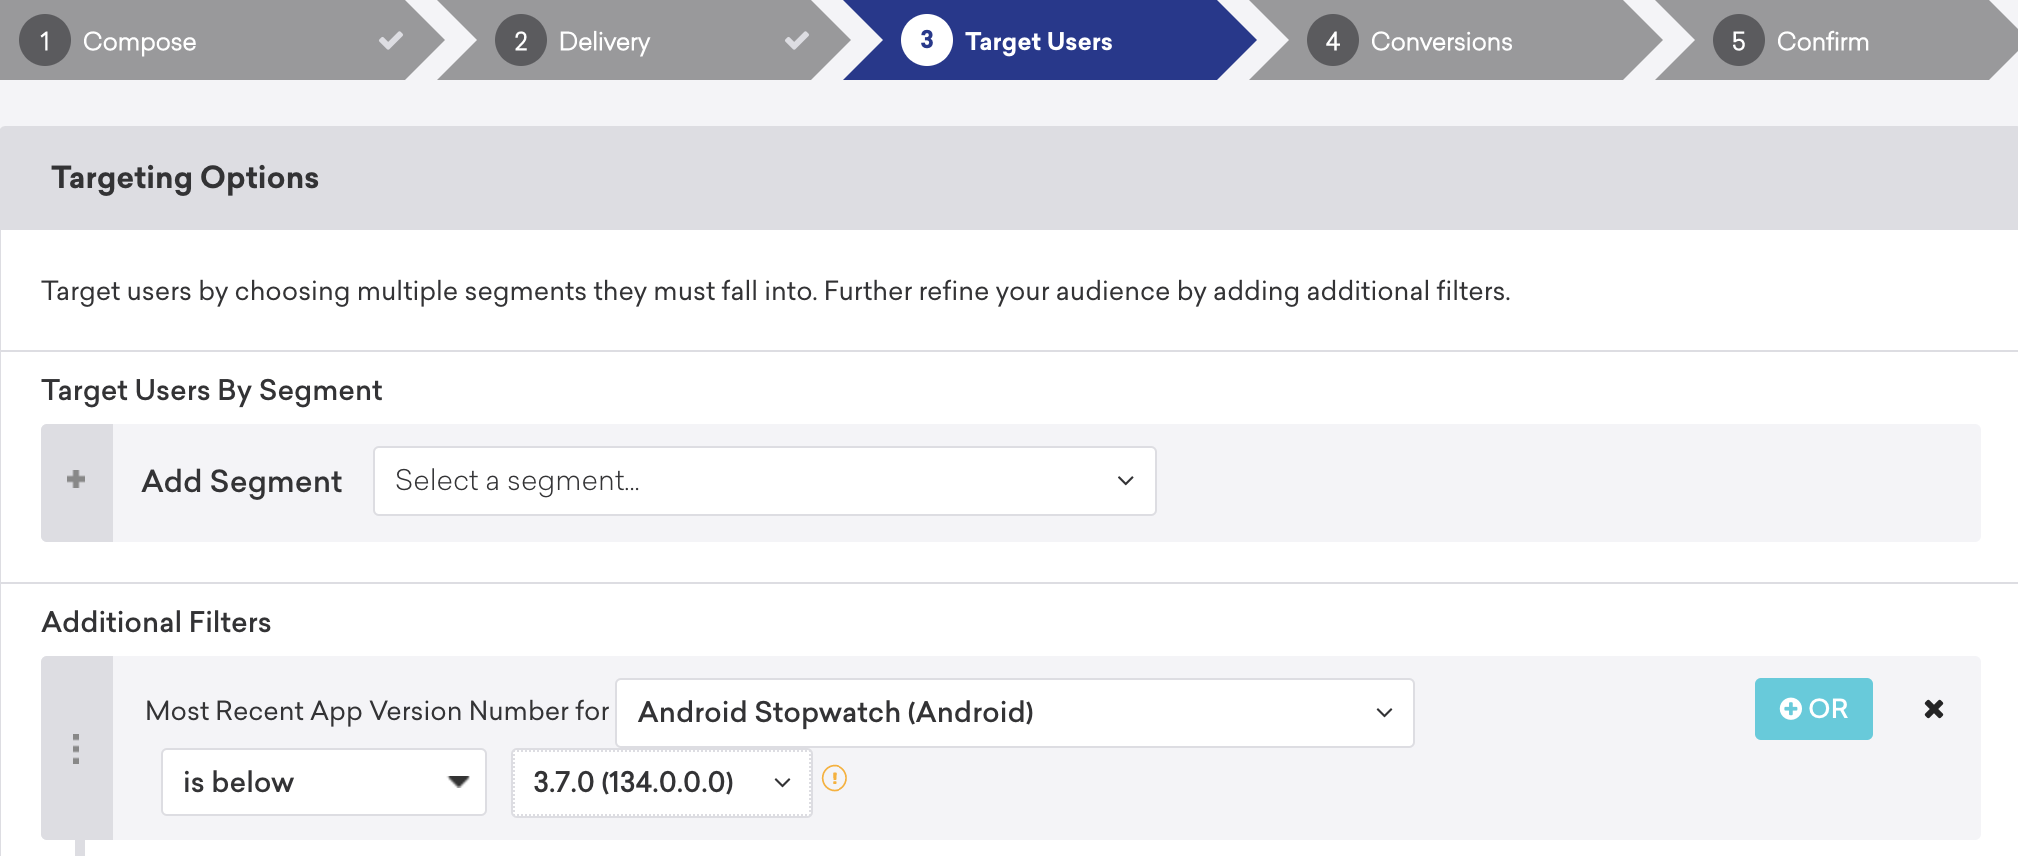 The Targeting Options panel in the Target Users step in the campaign building workflow. The Additional Filters section includes the following filter "Most Recent App Version Number for Android Stopwatch (Android) is below 3.7.0 (134.0.0.0)".